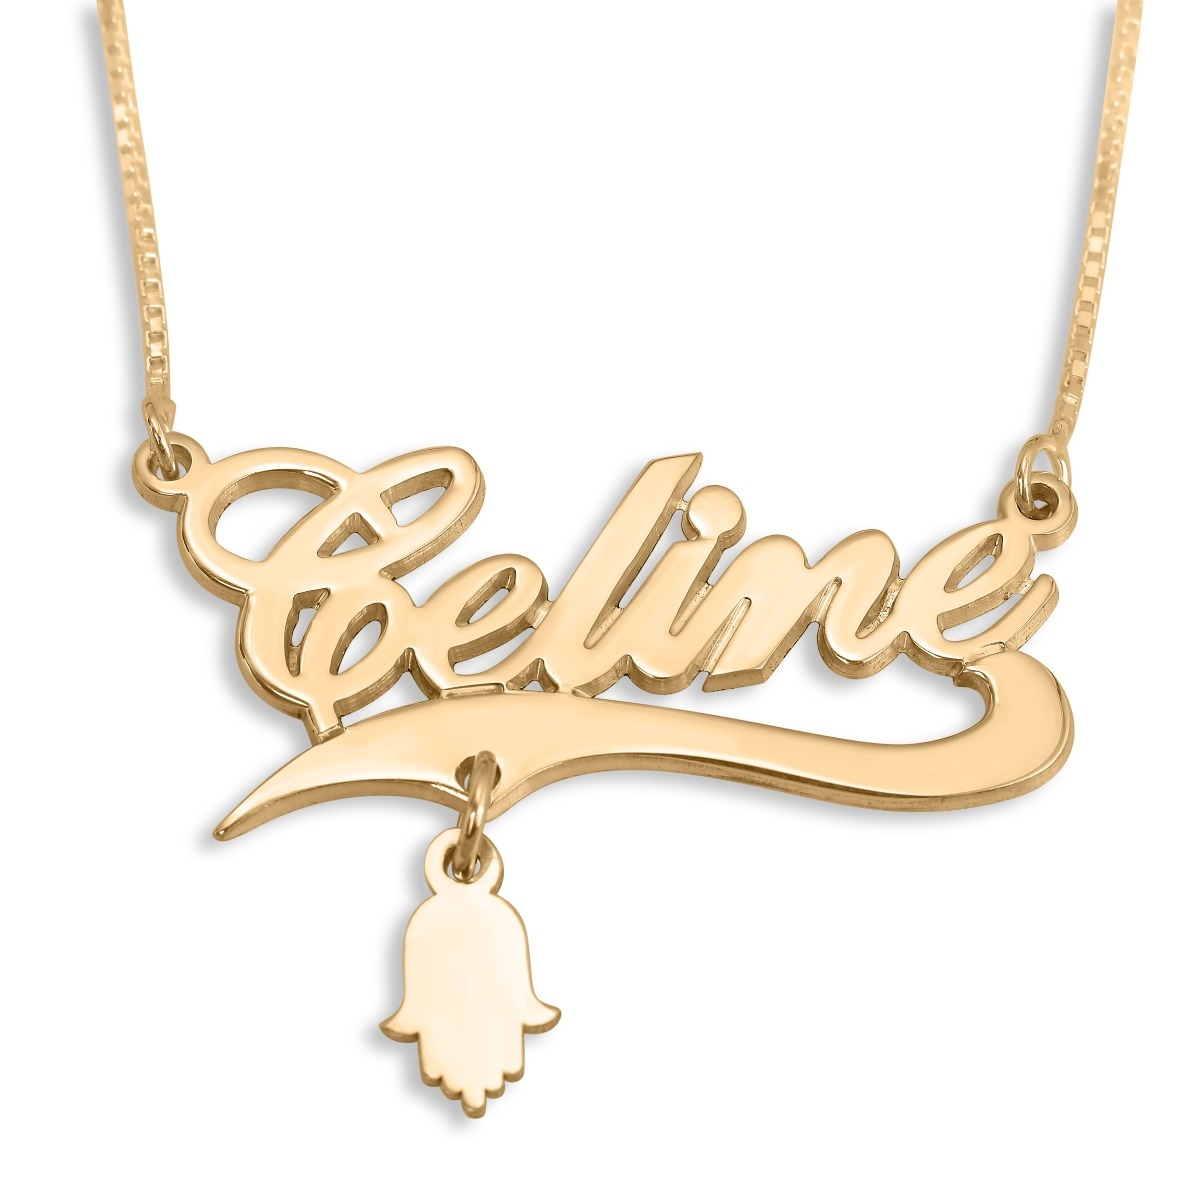 24K Gold-Plated Customizable Name Necklace with Hamsa Charm  - 1